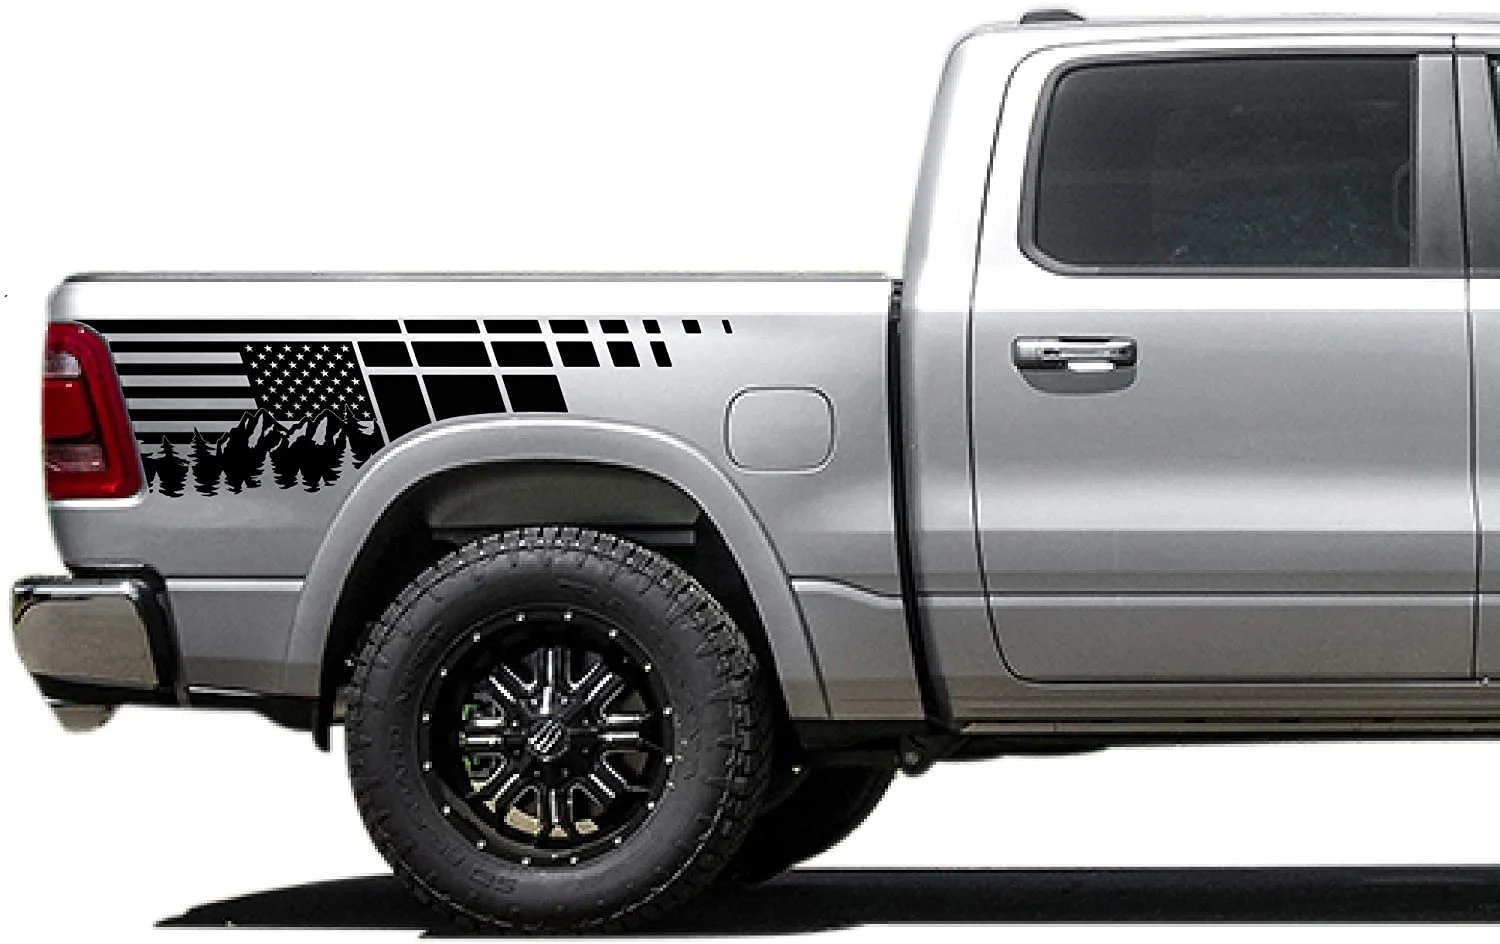 

For Bubbles Designs Decal Sticker Vinyl Bed Decal Compatible with Dodge Ram 2019-2020